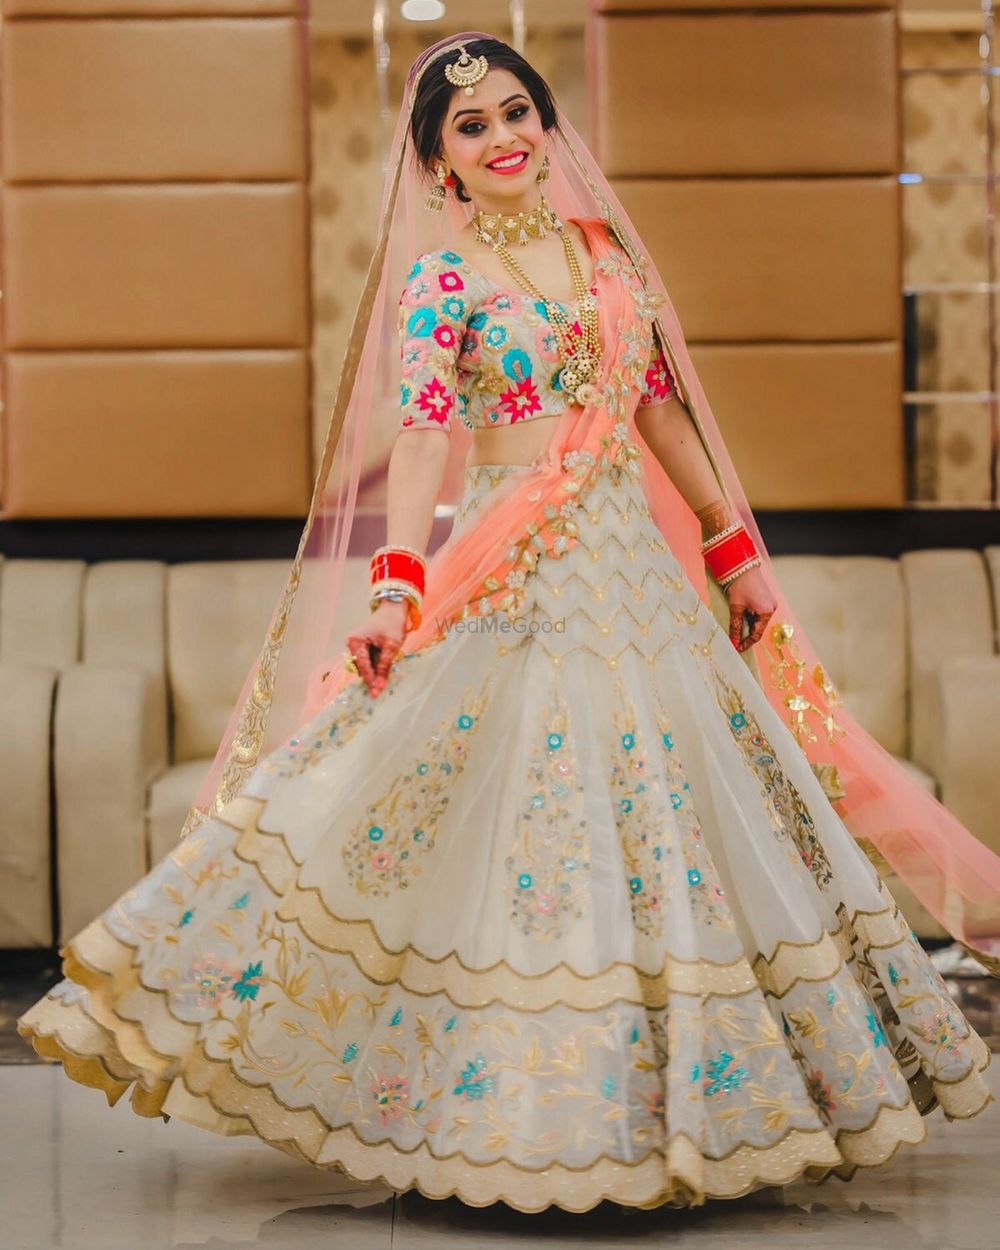 Photo of A bride in white and coral lehenga twirling